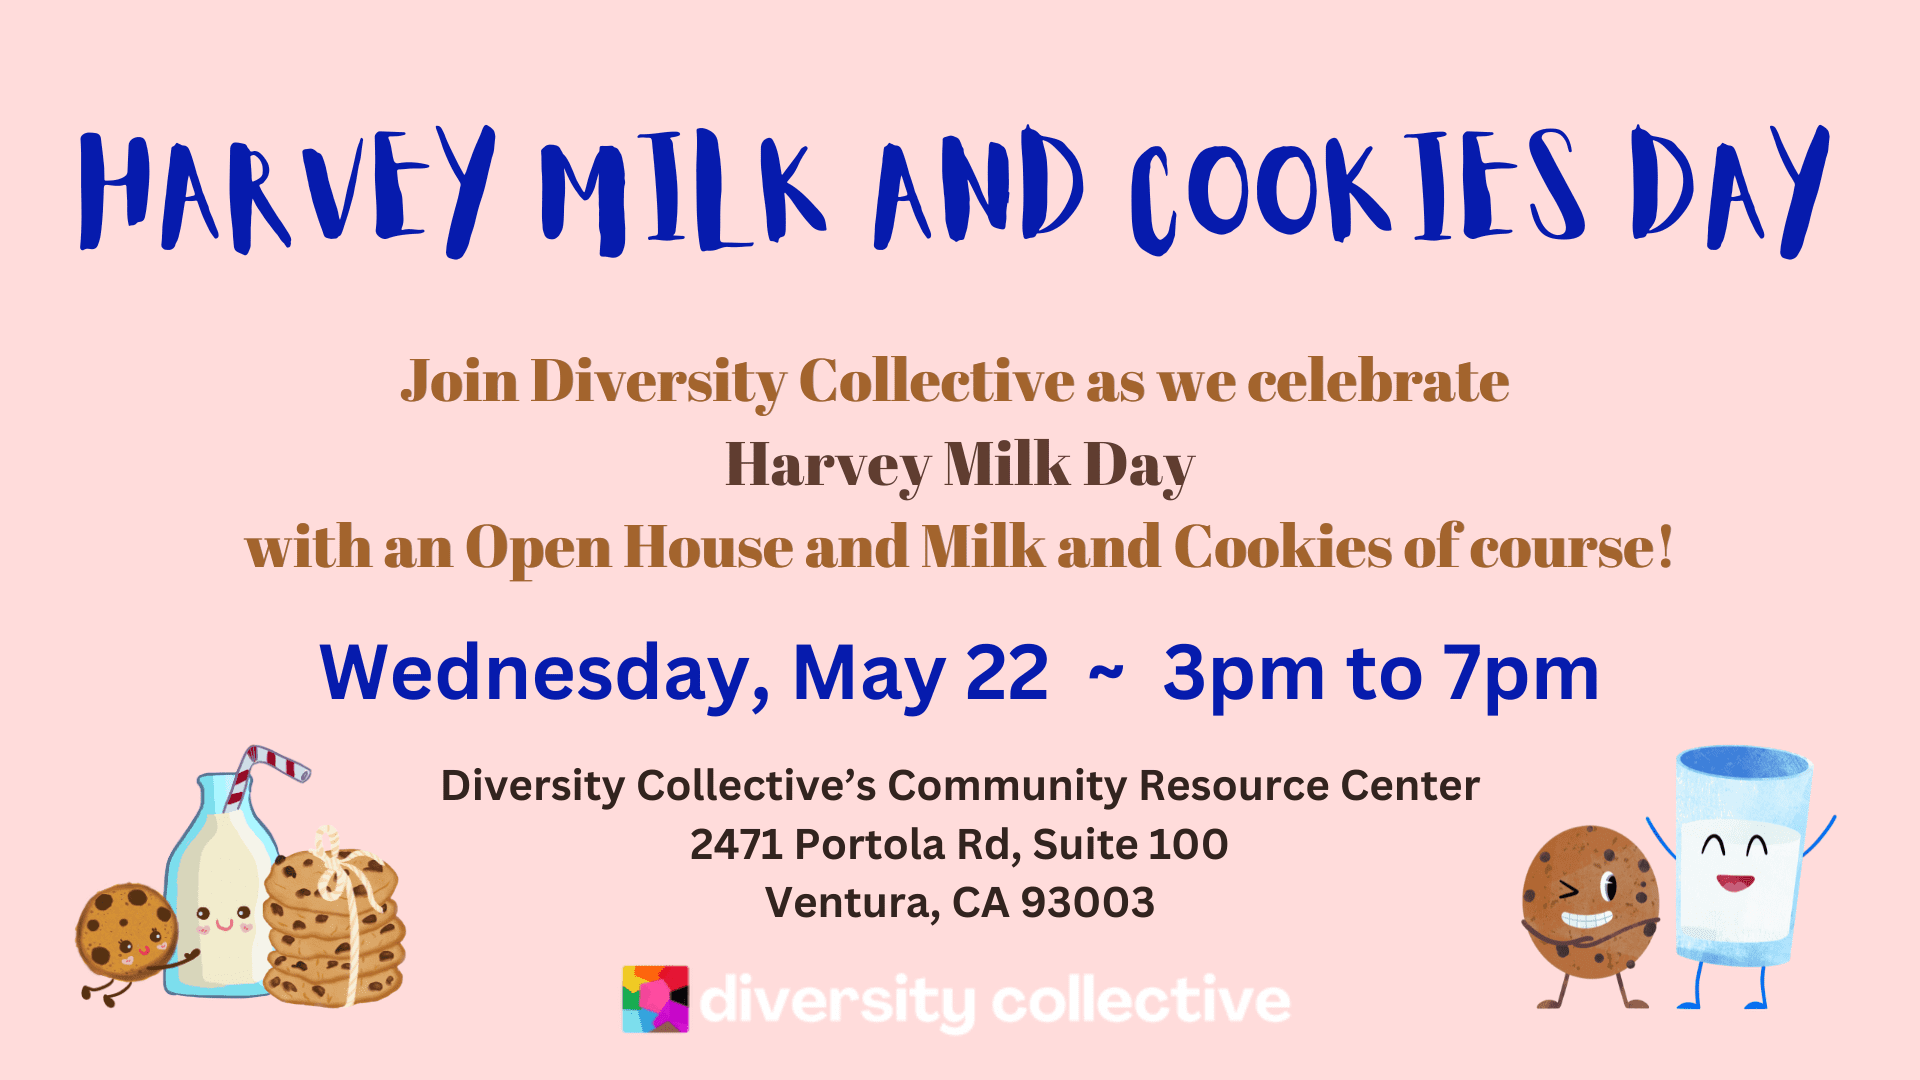 Event flyer announcing harvey milk day with an open house featuring milk and cookies, scheduled for may 22 from 3-7 pm at diversity collective's community resource center in ventura, ca.